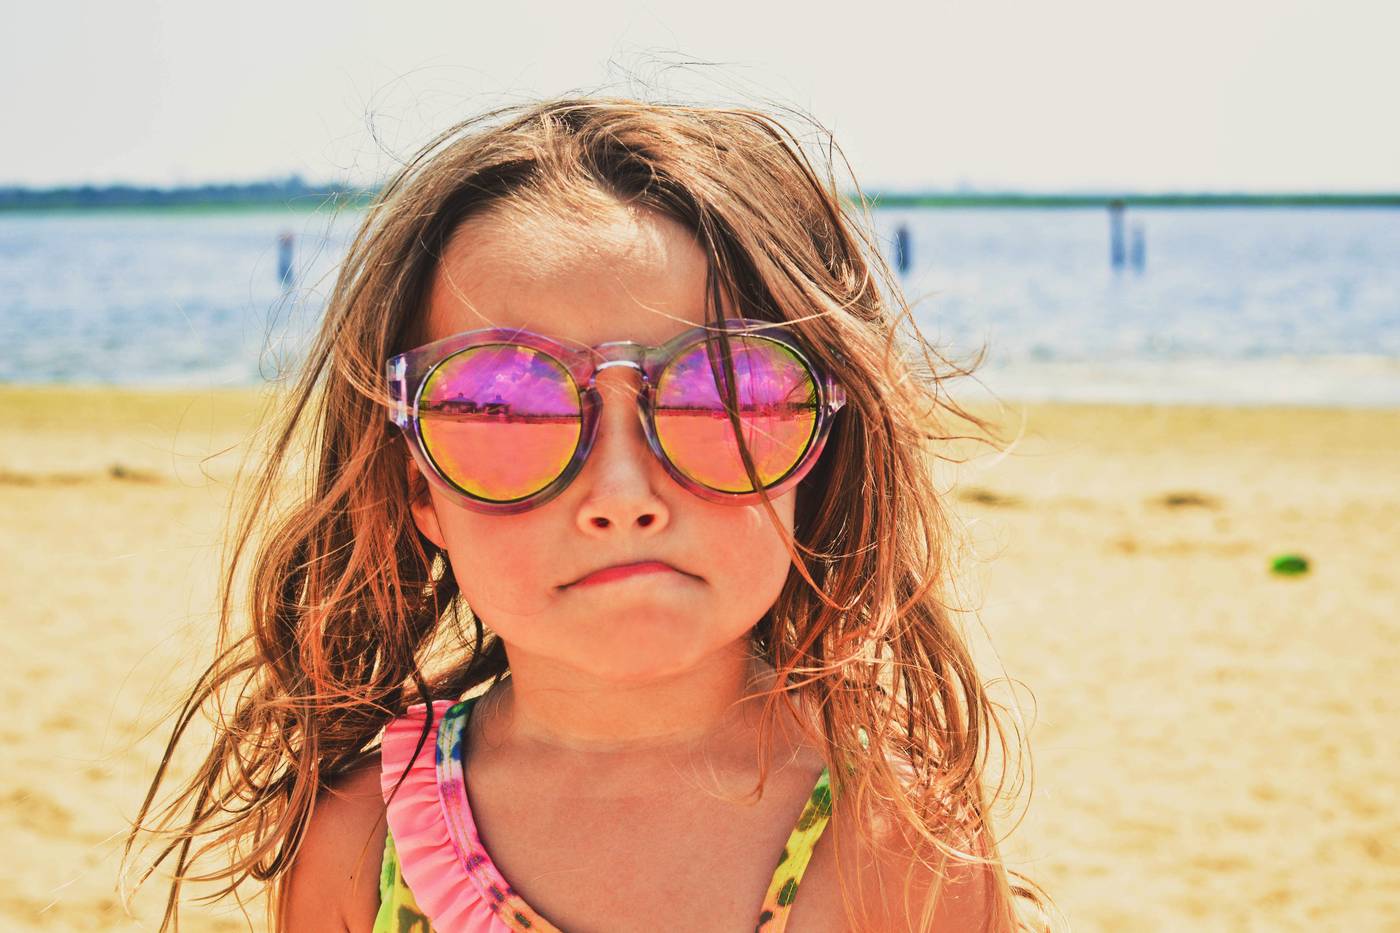 Little girl with sunglasses on the beach